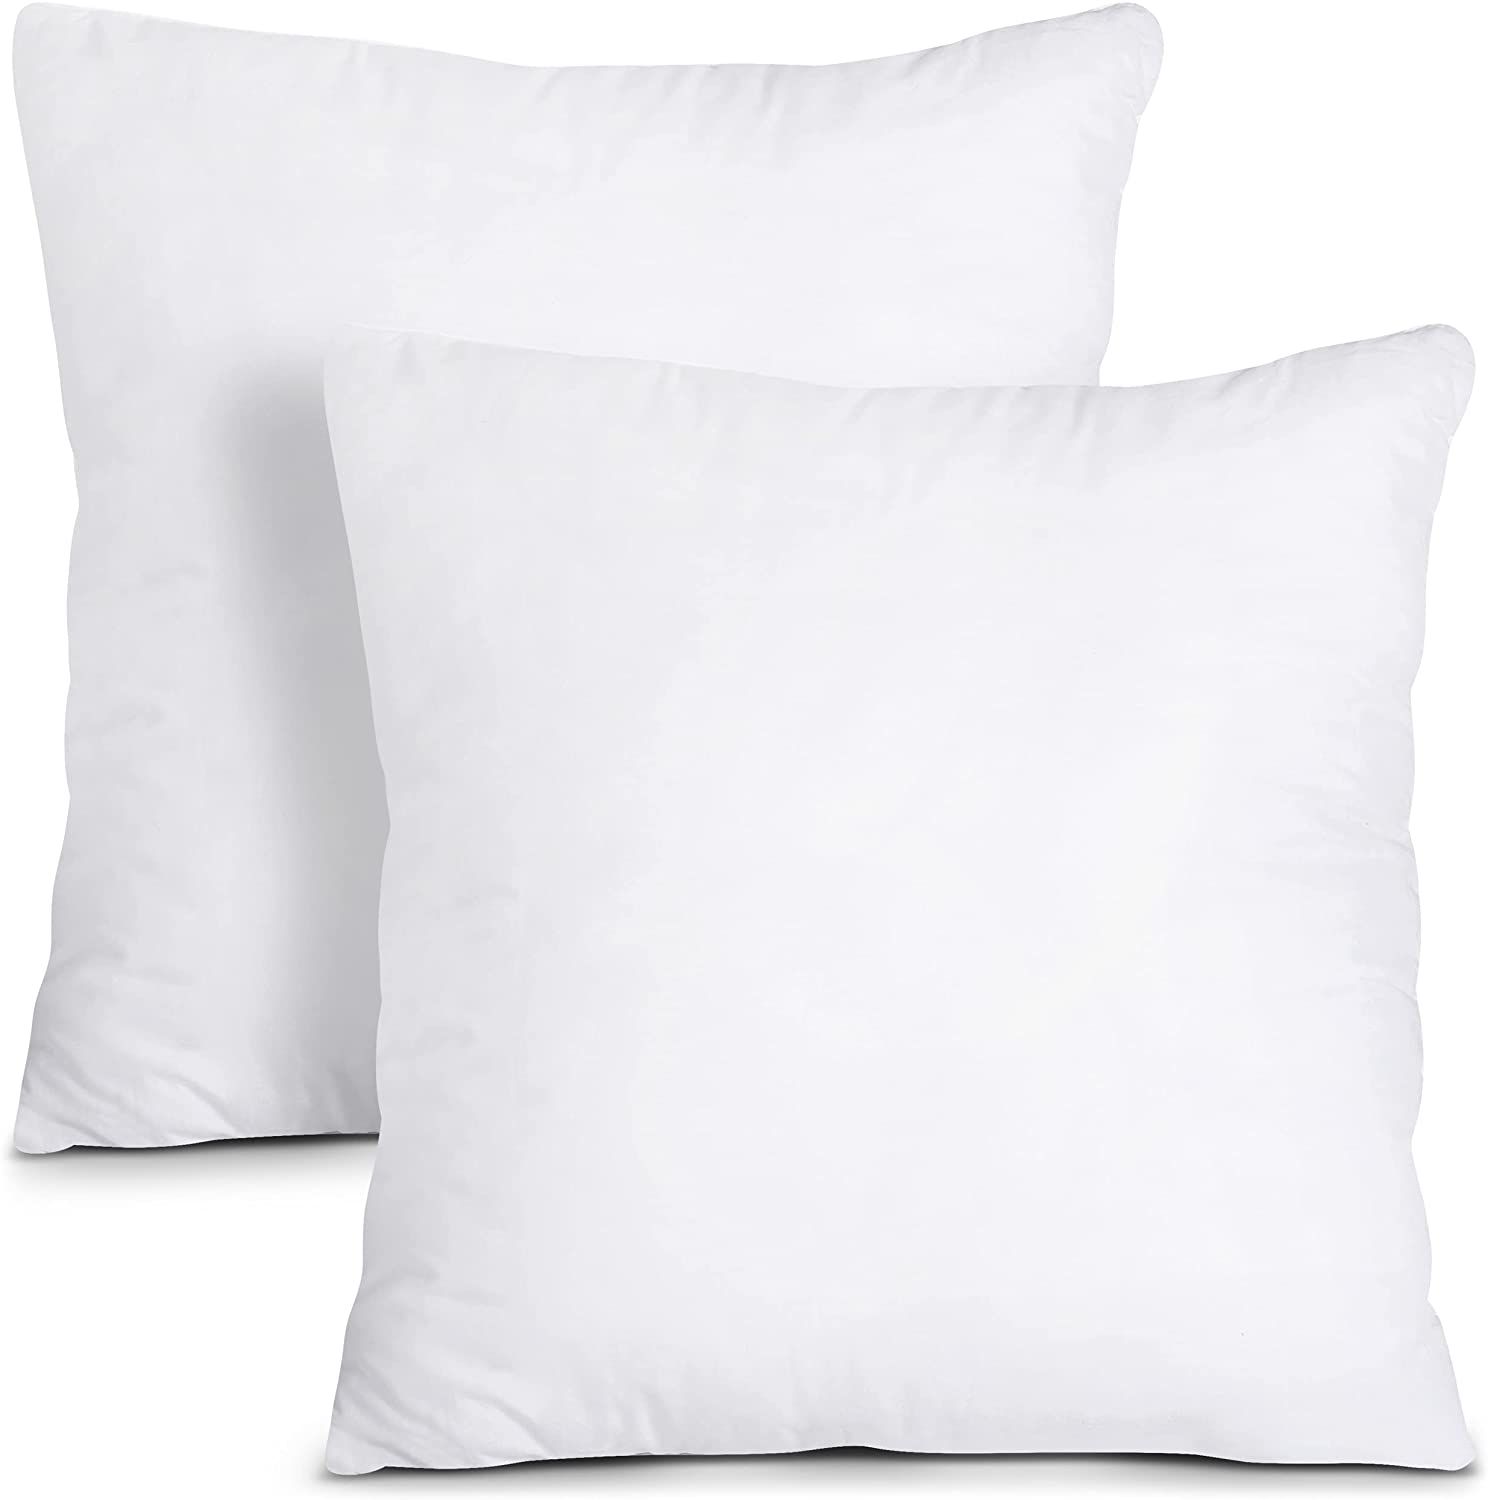 Utopia Bedding Throw Pillows Insert (Pack of 2, White) - 12 x 12 Inches Bed and Couch Pillows - I... | Amazon (US)